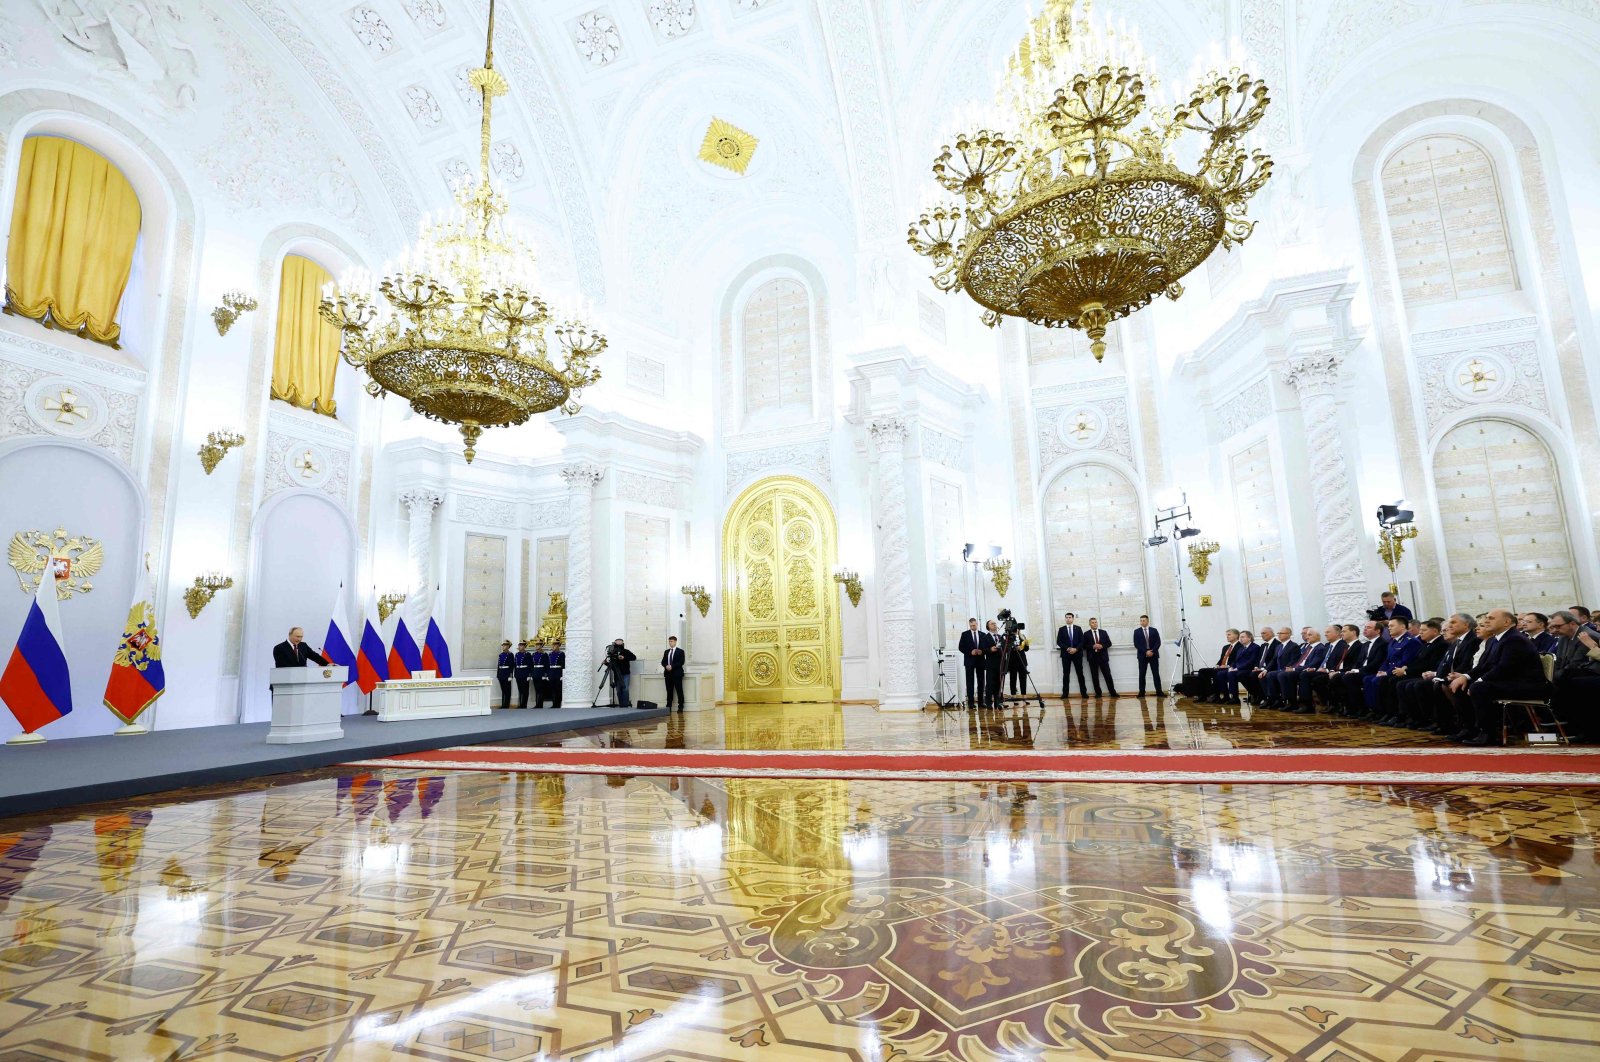 Russian President Vladimir Putin gives a speech during a ceremony formally annexing four regions of Ukraine, at the Kremlin, Moscow, Russia, Sept. 30, 2022. (Photo by Dmitry Astakhov / SPUTNIK / AFP)